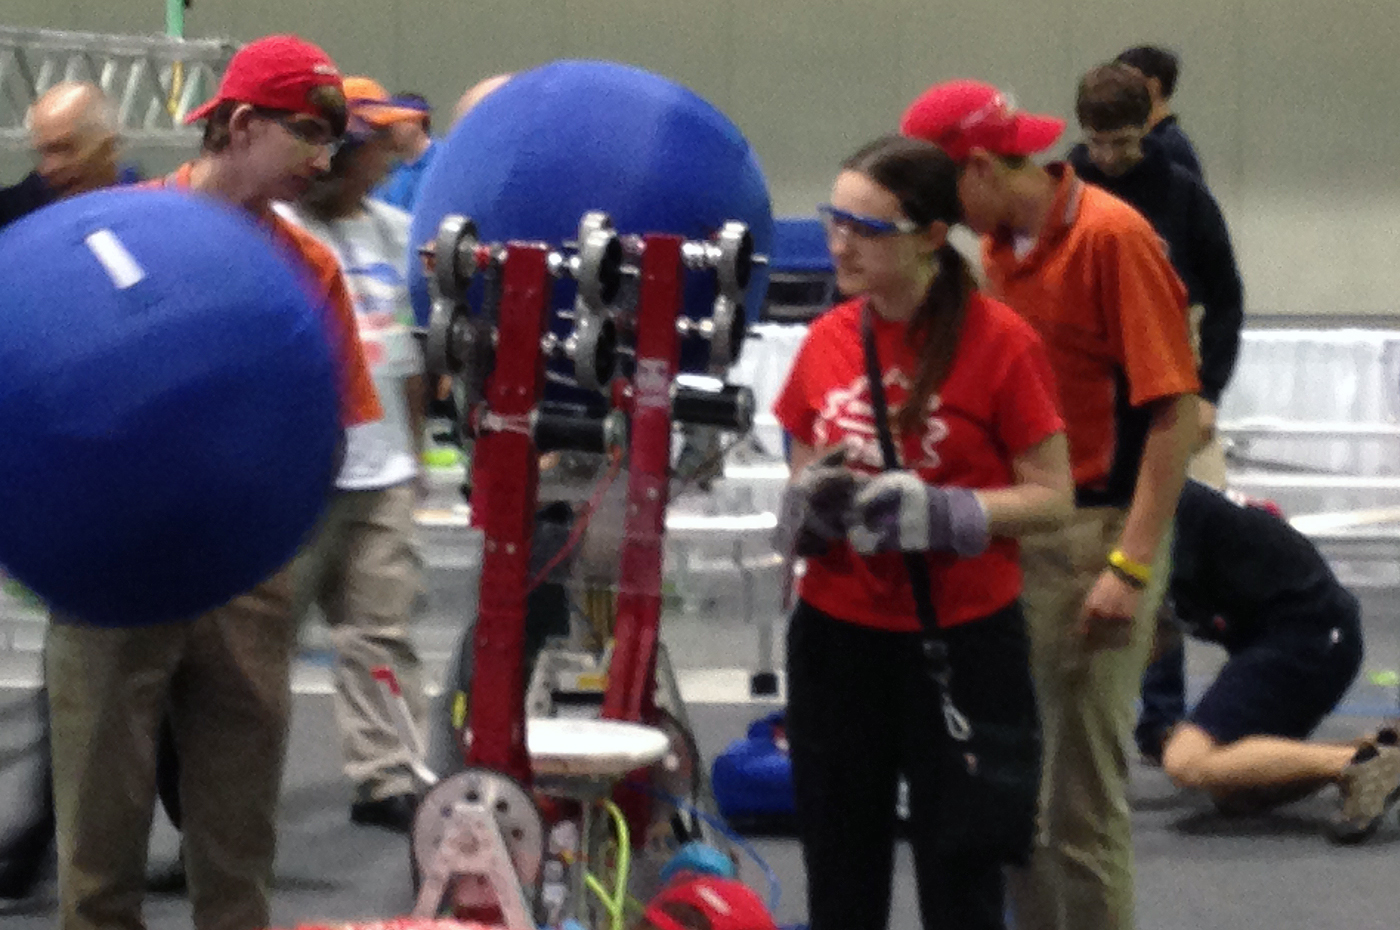 Teammates making last-minute adjustments to their robot.